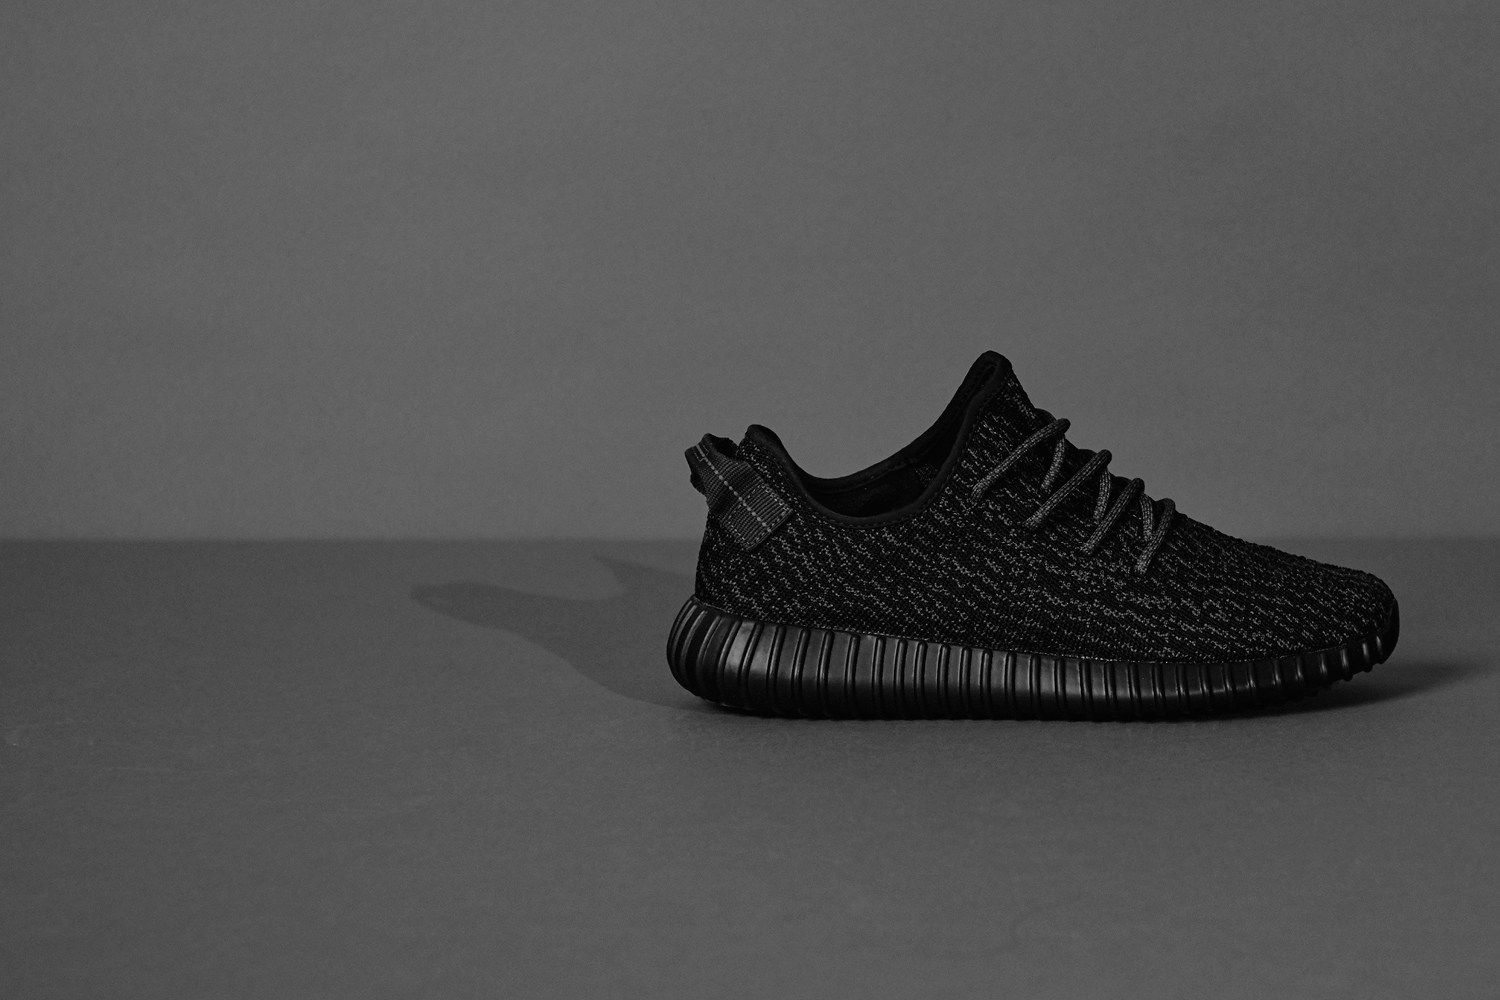 yeezy-boost-350-adidas-announcement-photo-2